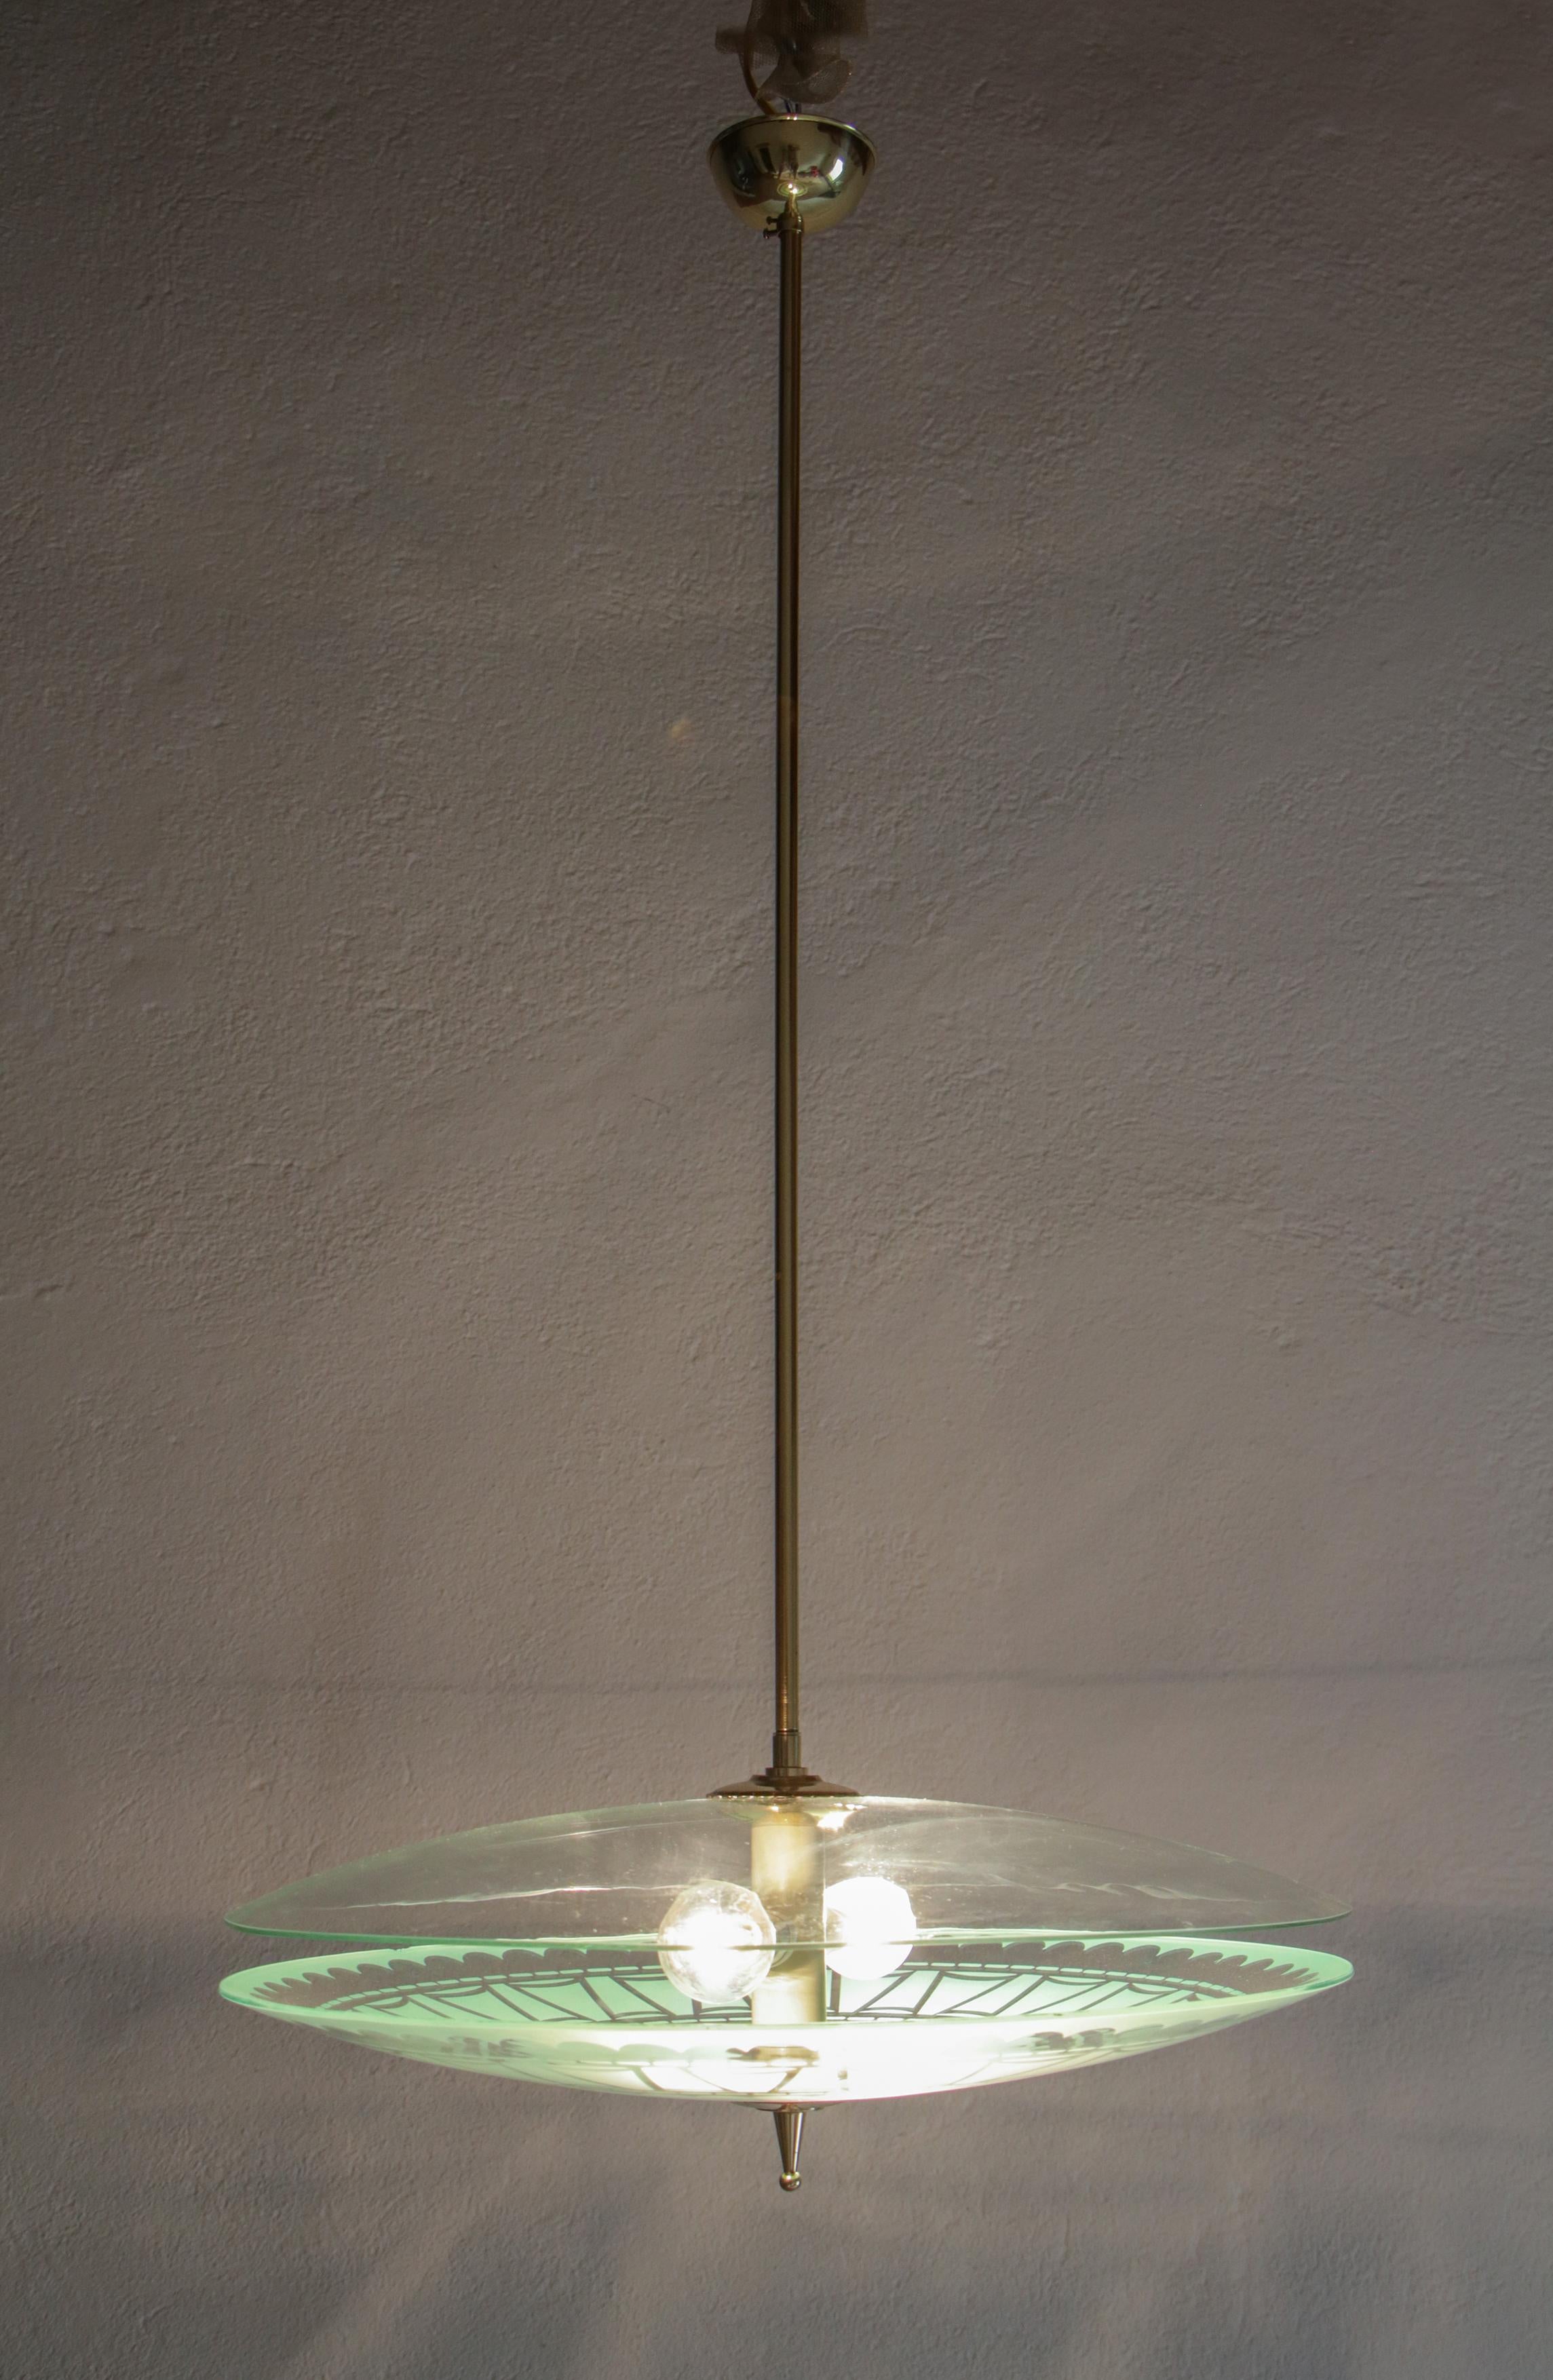 Italian Mid-Century Modern Double Disc Decorated Glass Pendant Lamp, 1950s For Sale 6